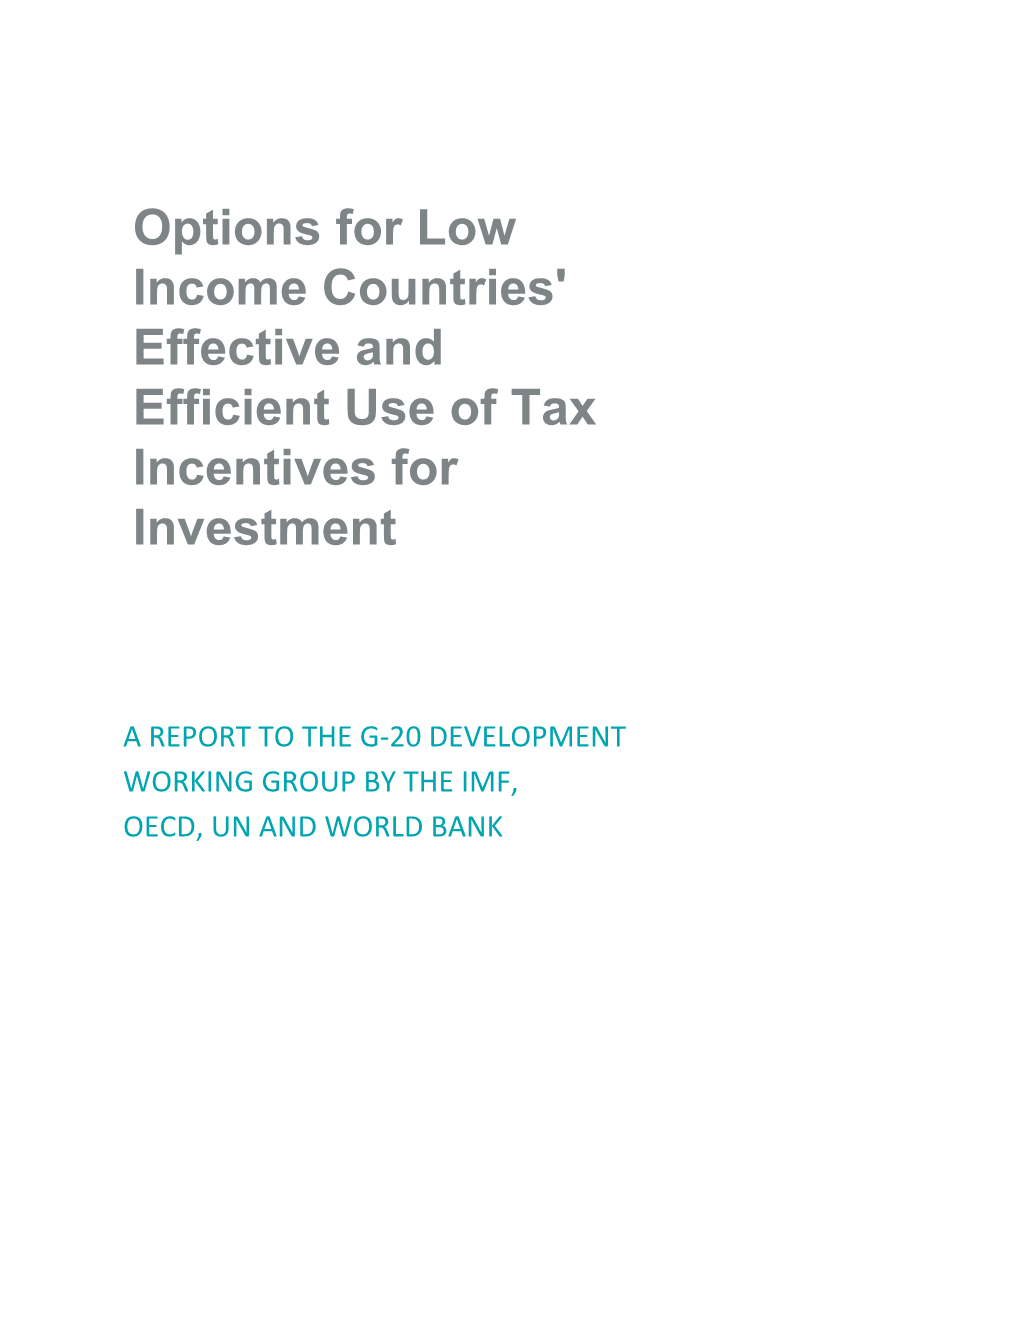 Countries' Effective and Efficient Use of Tax Incentives for Investment